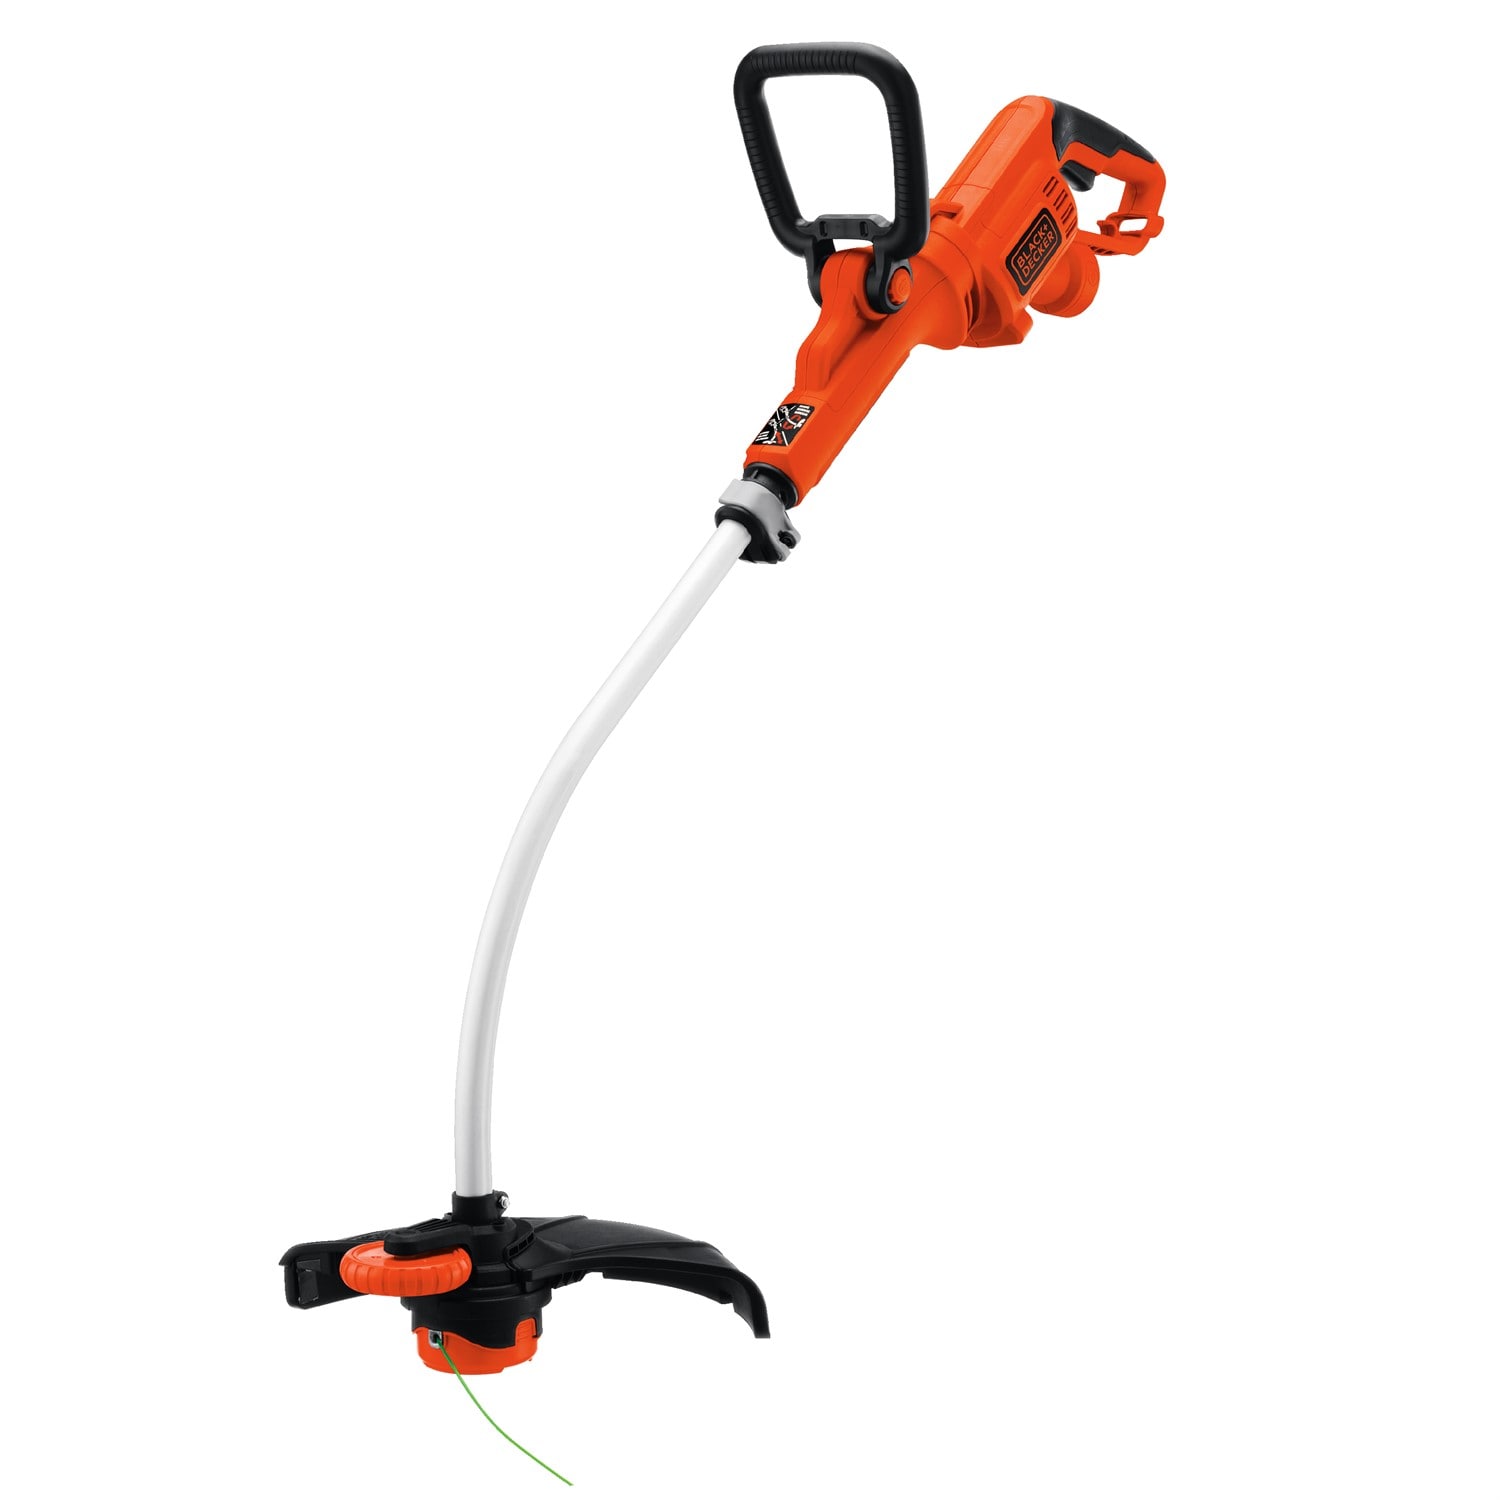 BLACK+DECKER EASYFEED 14-in Straight Shaft Corded Electric String